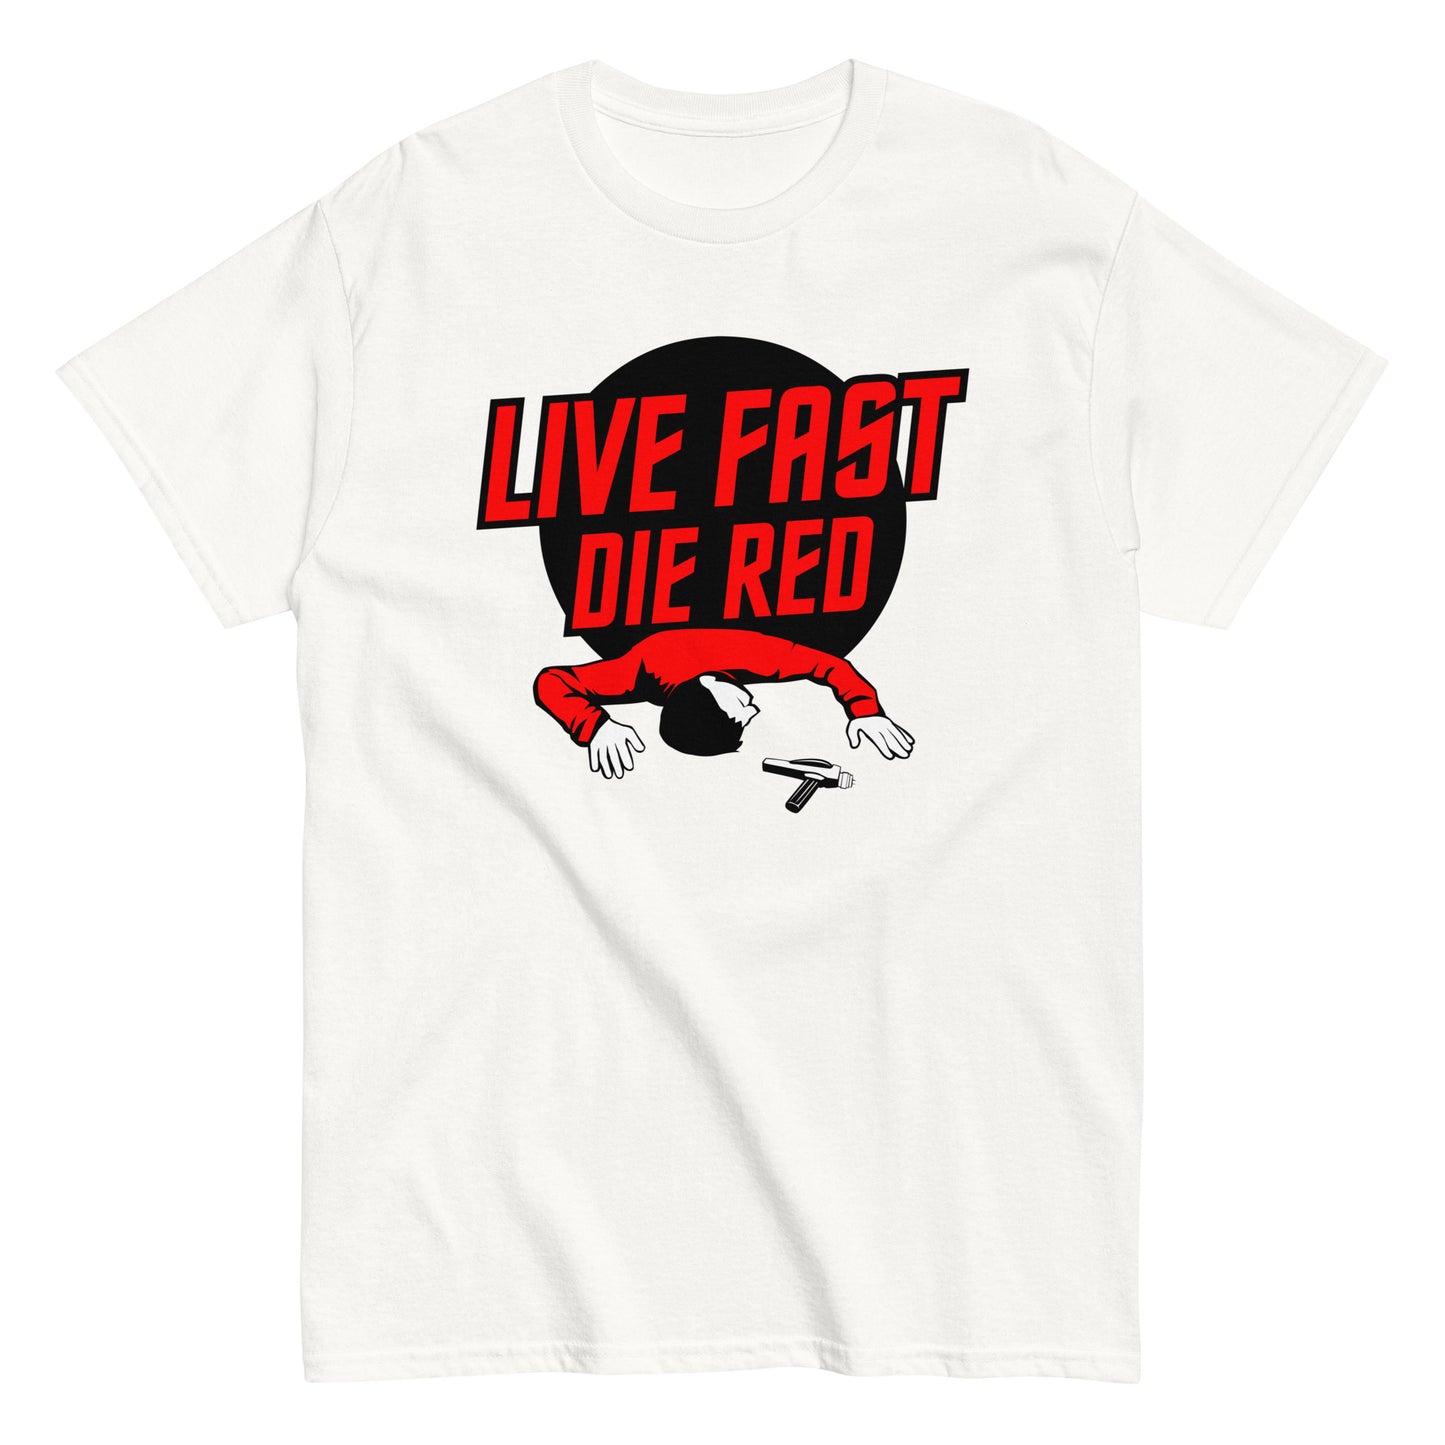 Live Fast Die Red Men's Classic Tee